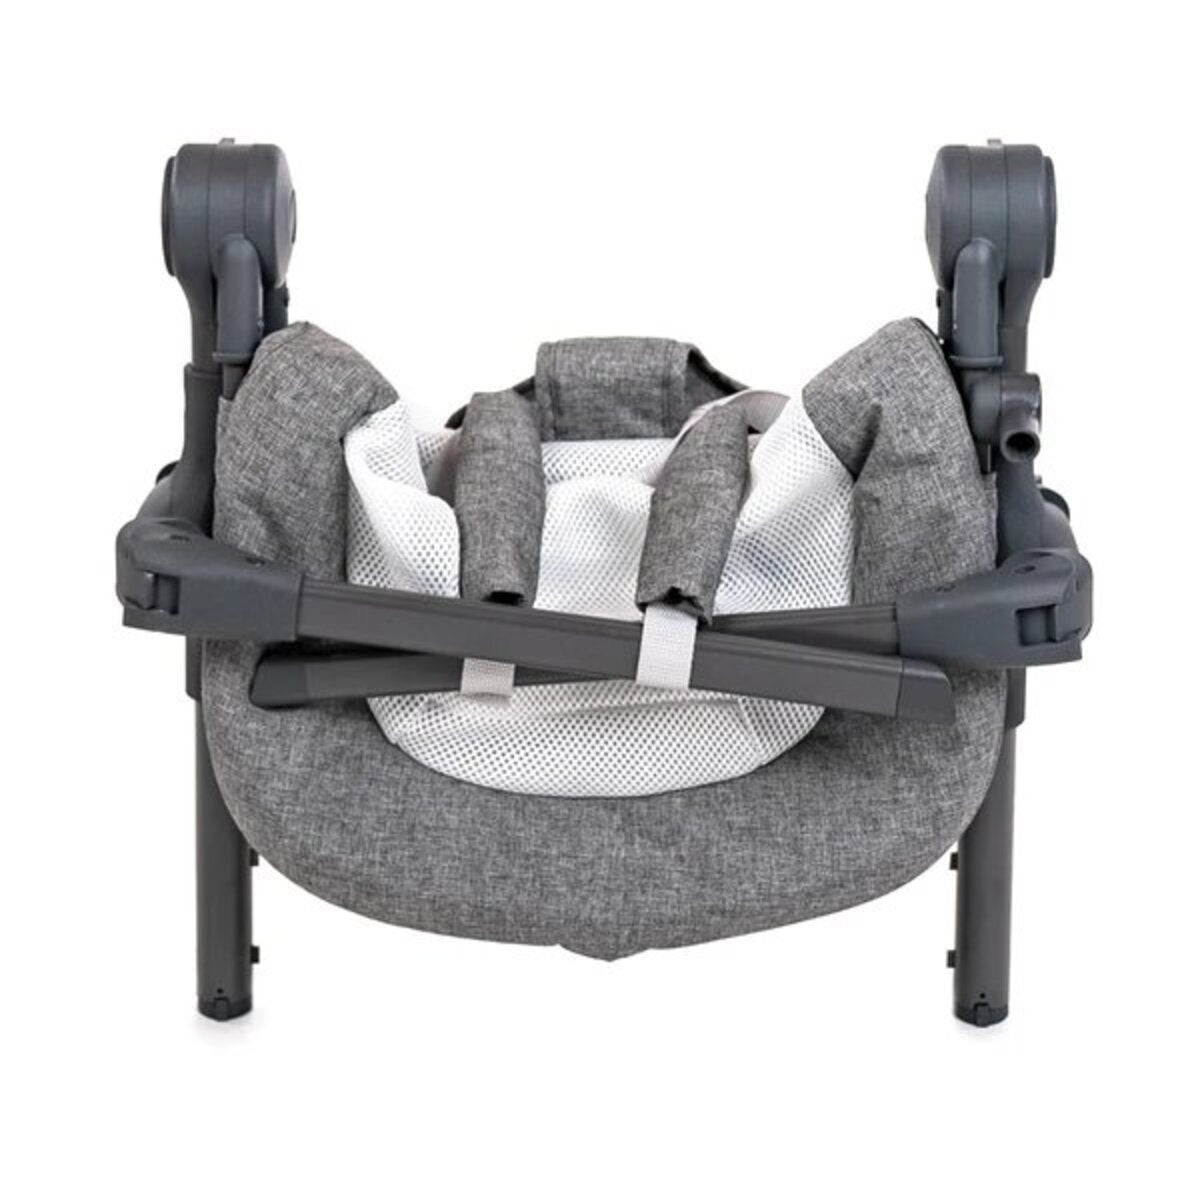 Baby Delight Bloom Soothing Adjustable Seat, 819956000336 - ANB Baby